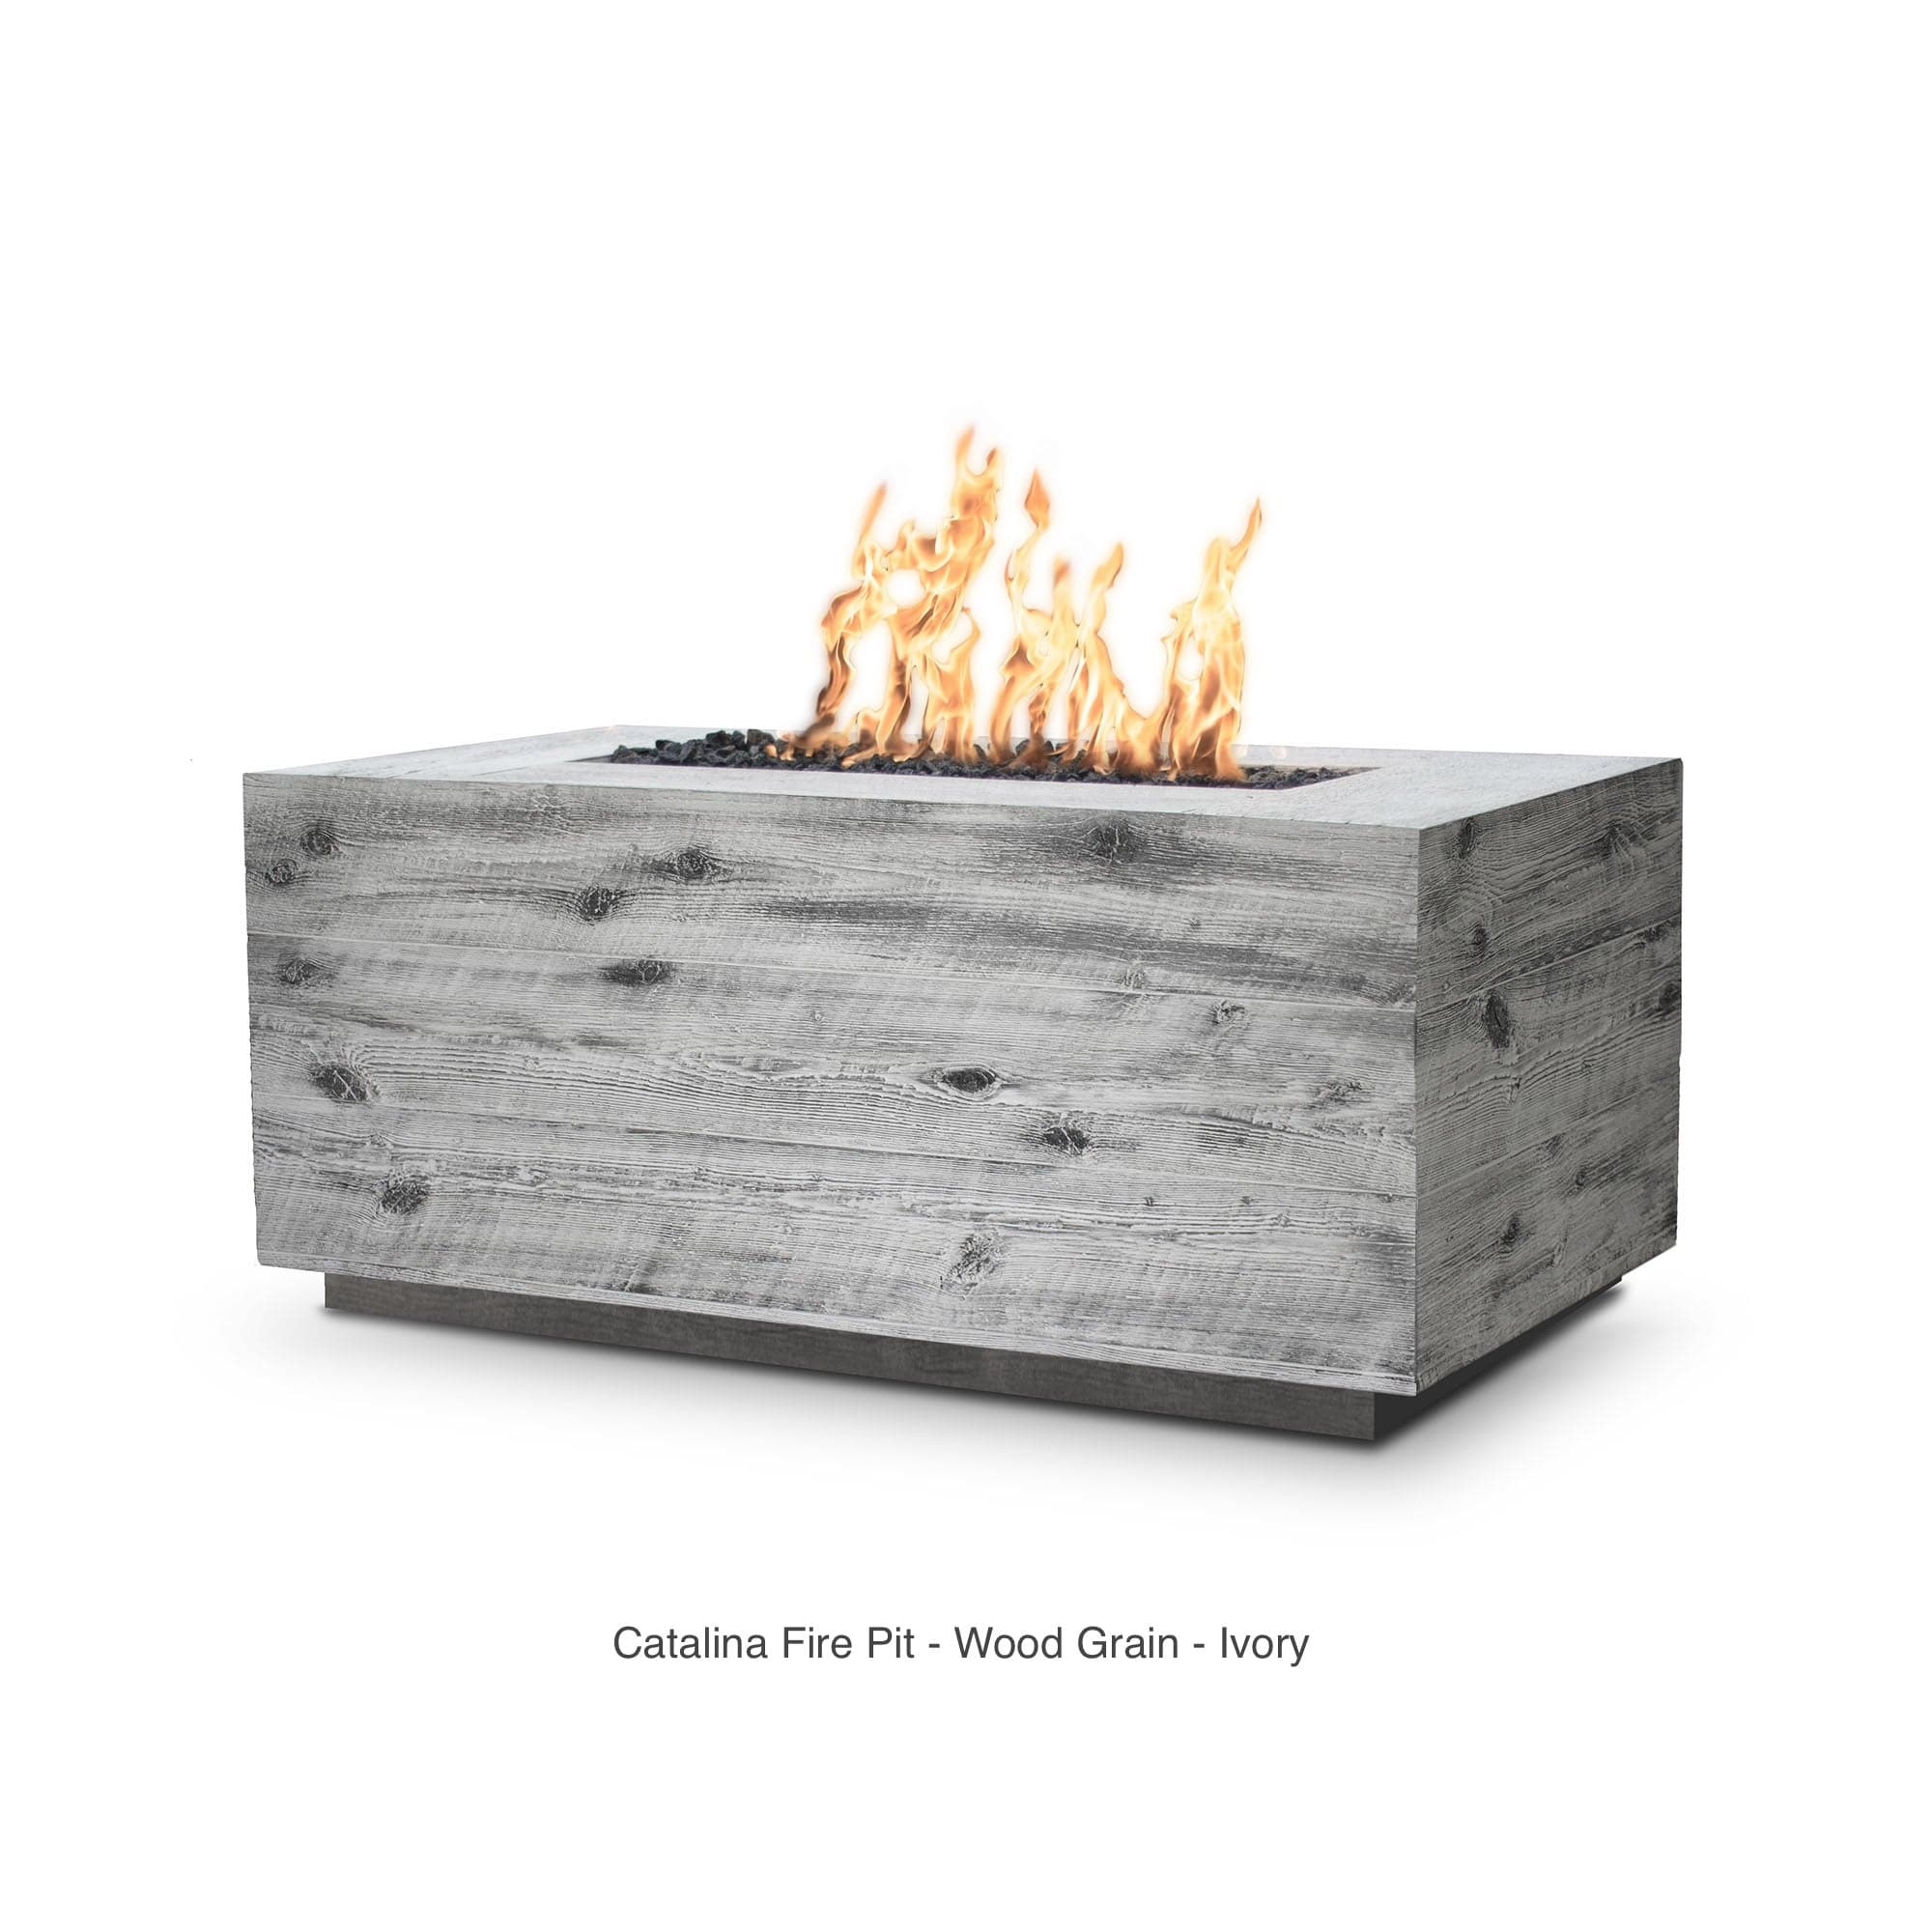 The Outdoor Plus Fire Features The Outdoor Plus 48", 60", 72", 84", 96", 108", 120" Rectangular Wood Grain GFRC Concrete Catalina Fire Pit / OPT-CTL48, OPT-CTL60, OPT-CTL72, OPT-CTL84, OPT-CTL96, OPT-CTL108, OPT-CTL120